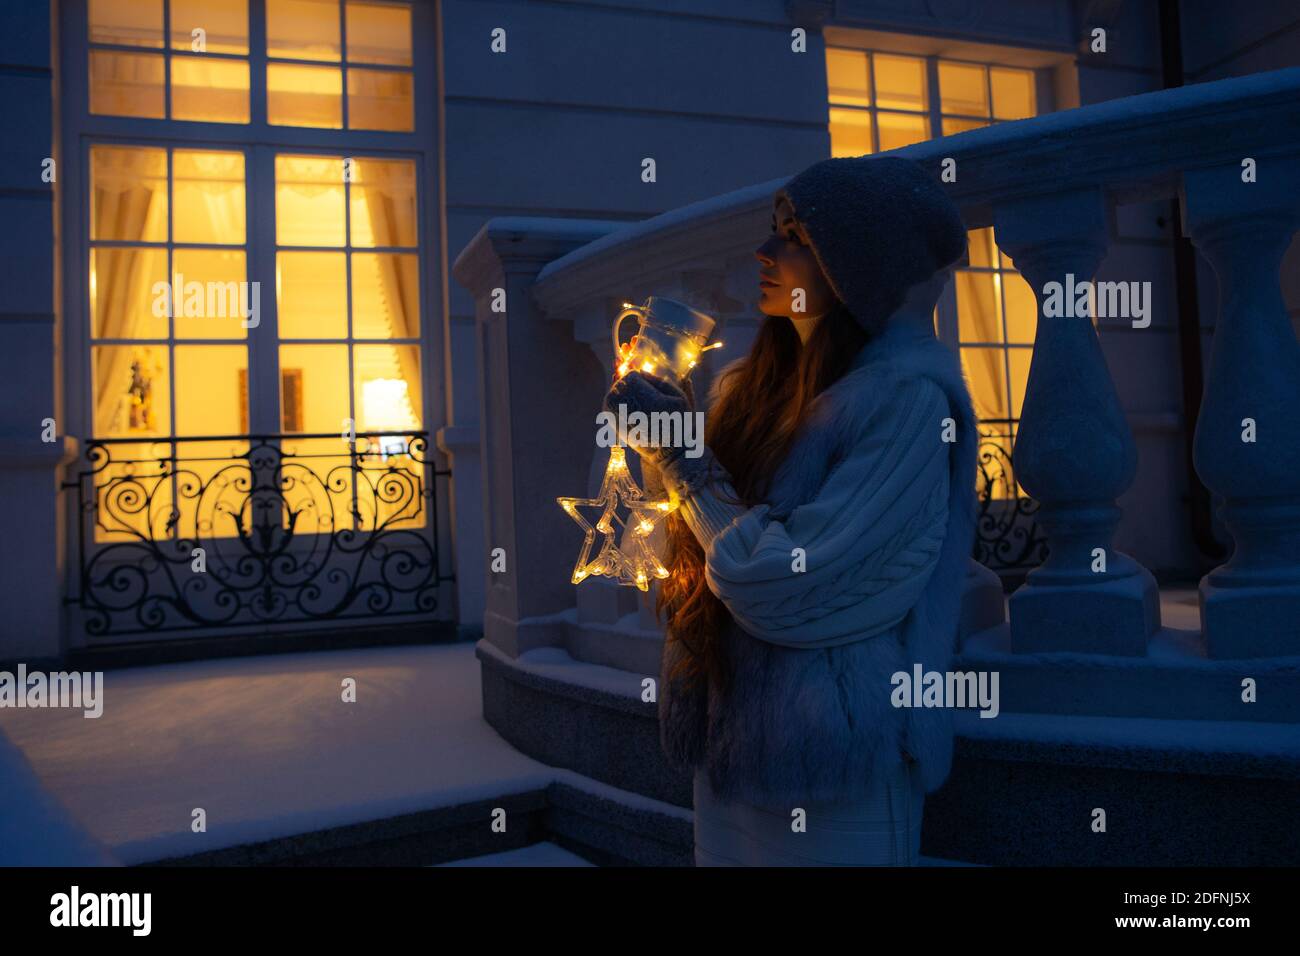 Christmas Eve portrait. Woman in front of her house in Christmas night, surrounded by snowflakes and warm lights. Stock Photo